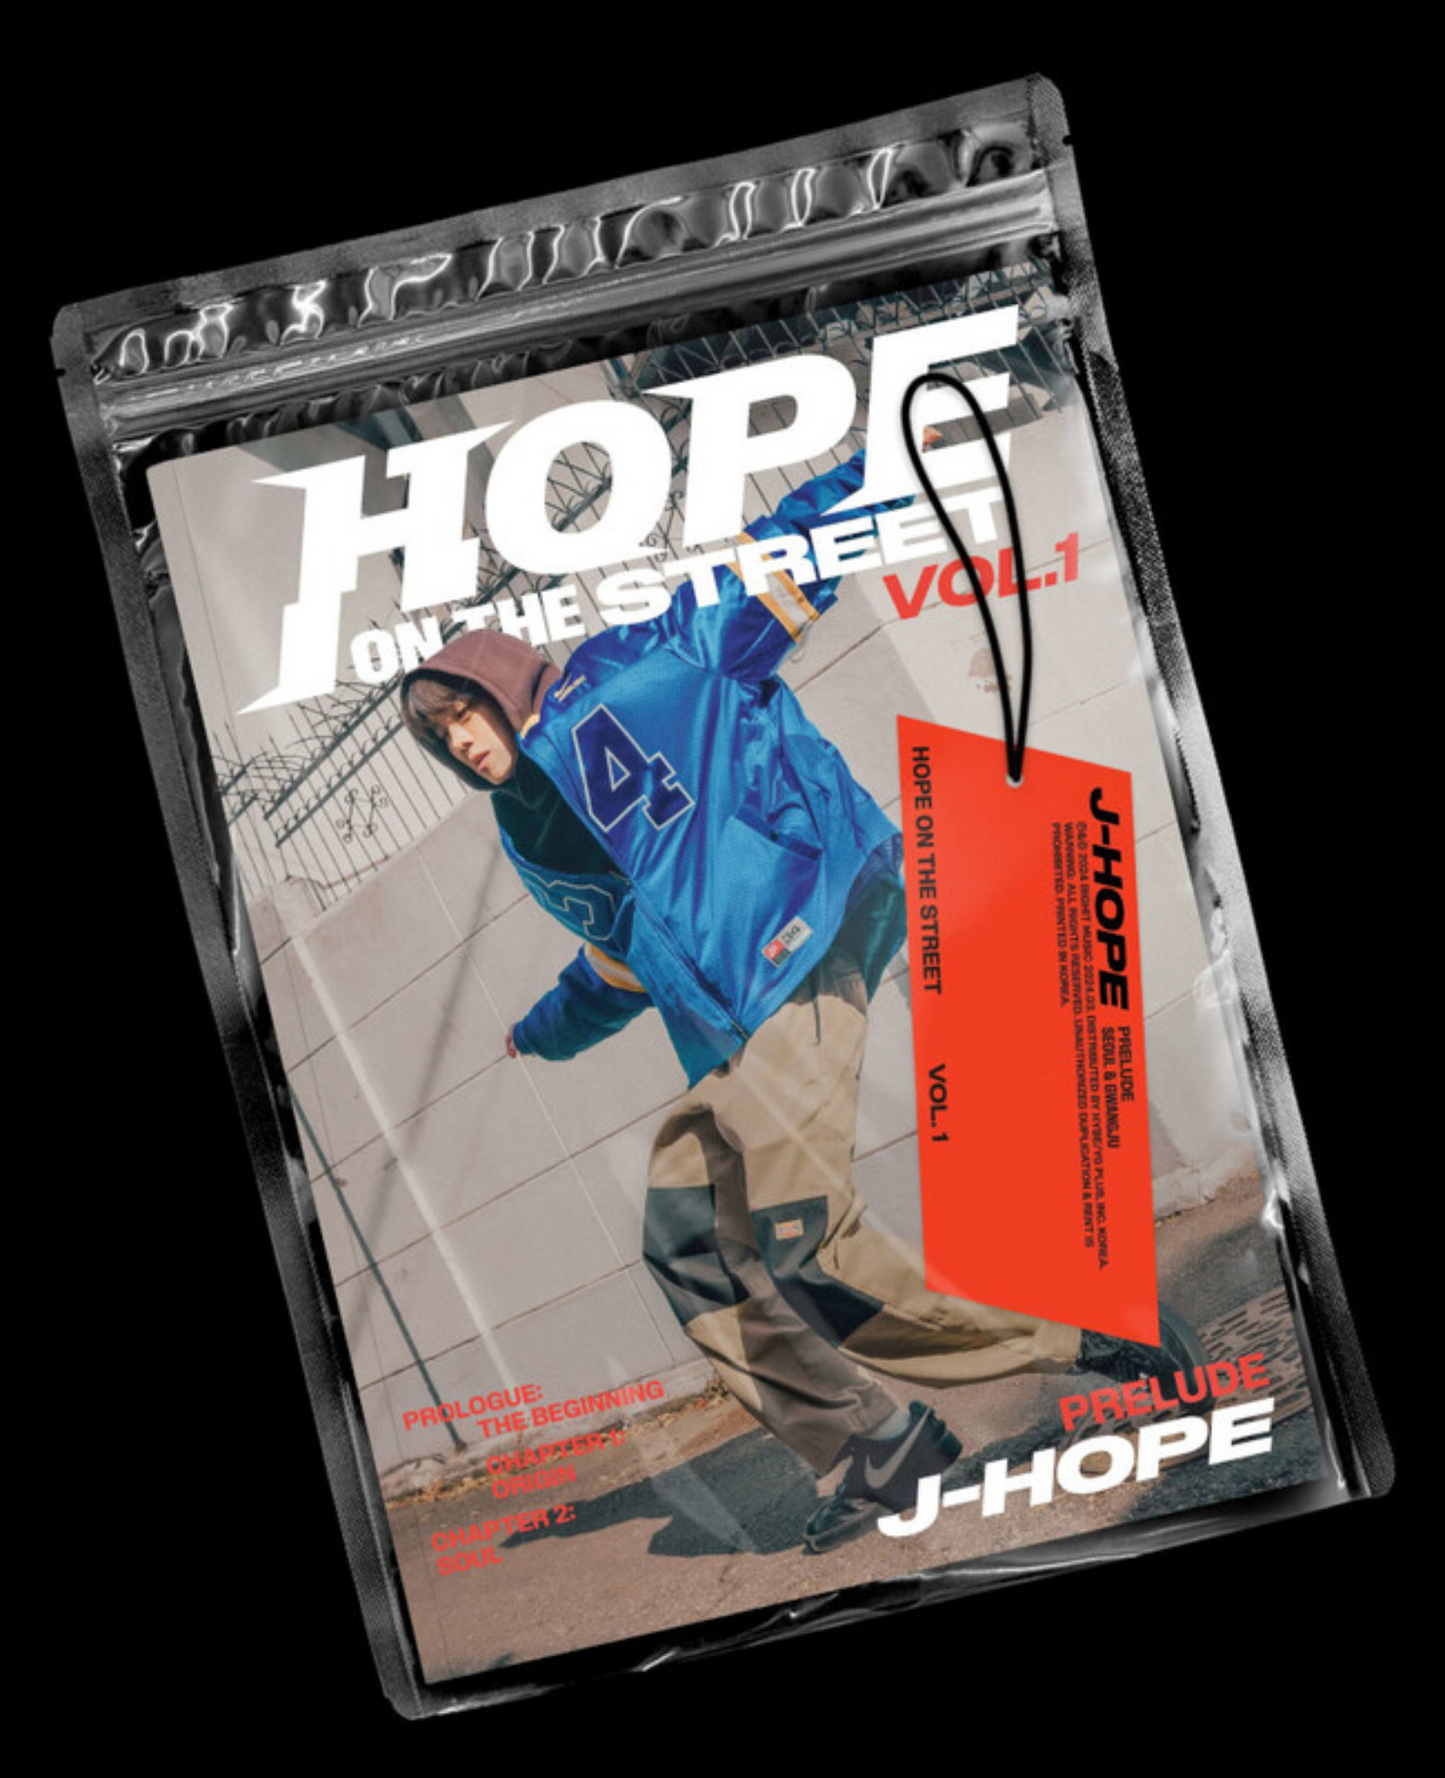 16415-J-hope hope on the street interlude  (1).png